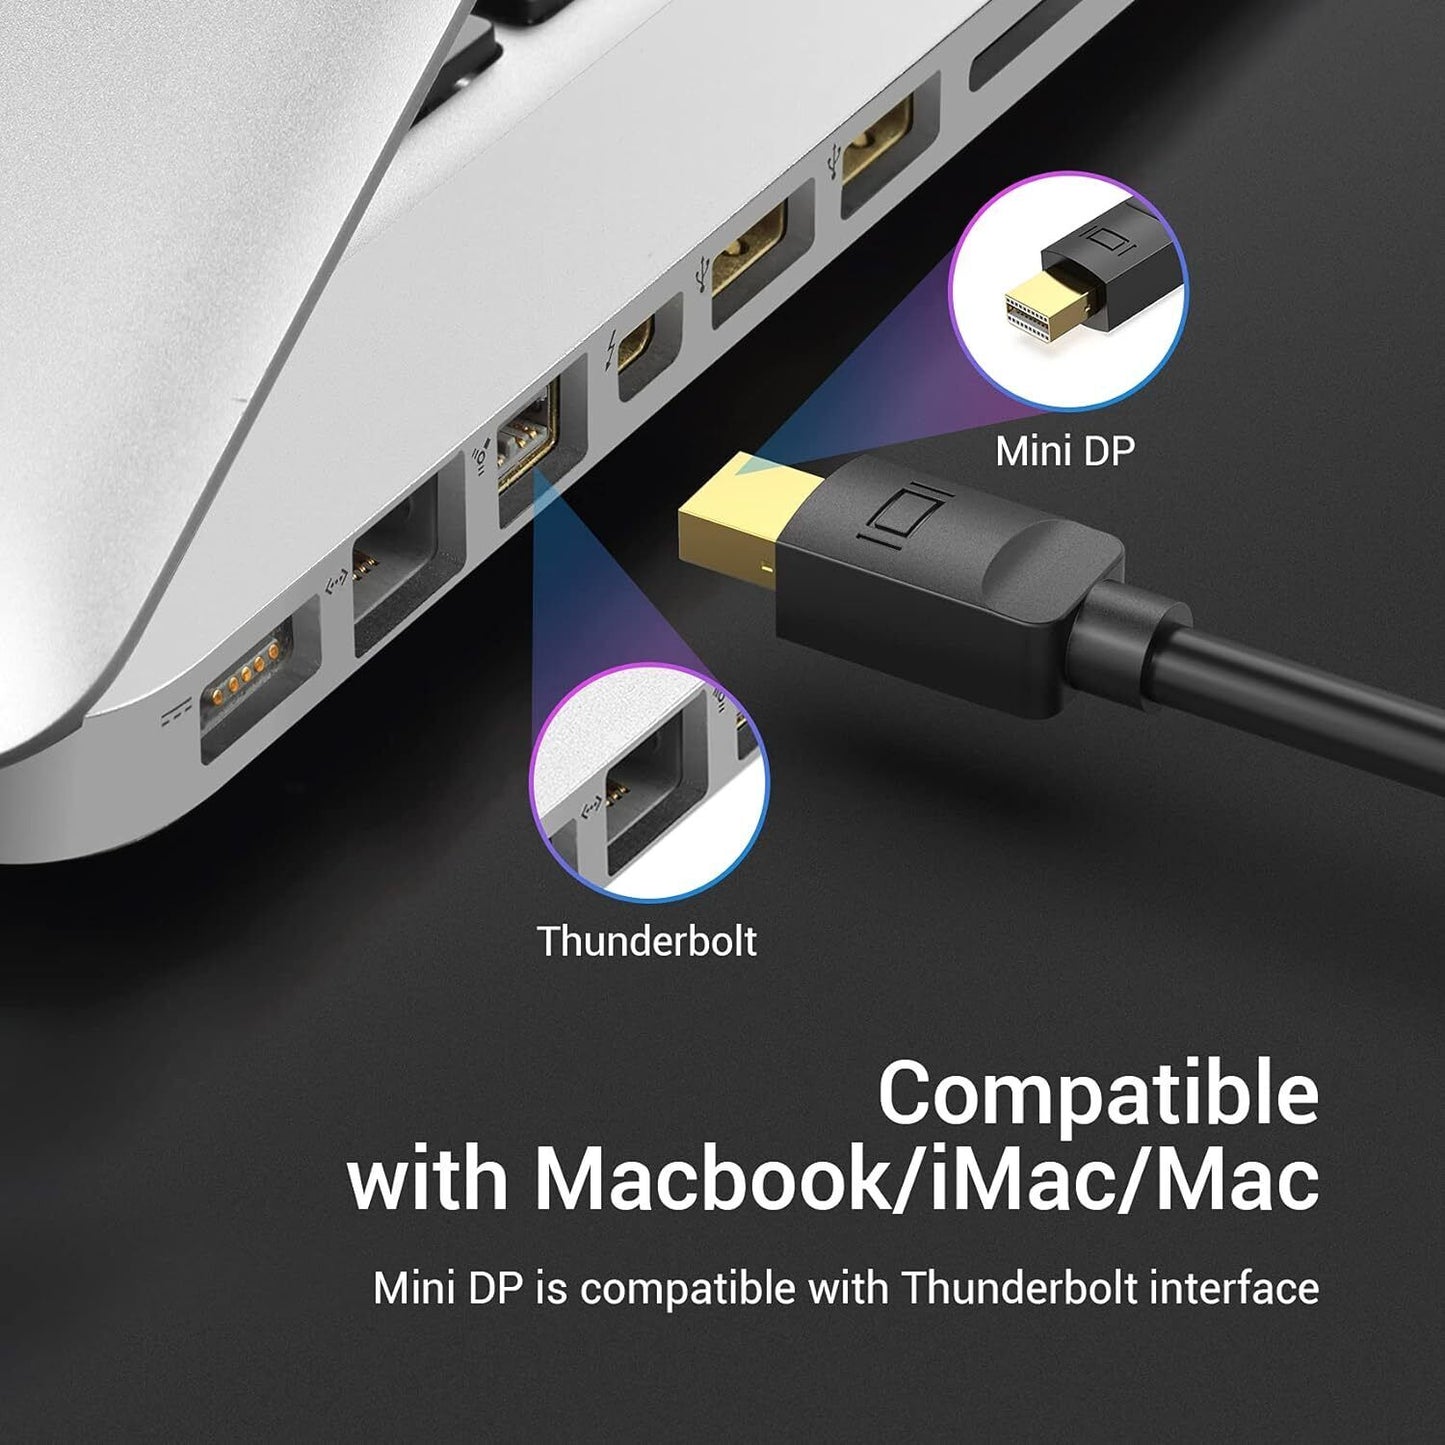 Mini DisplayPort To HDMI Cable, 1080P Compatible With MacBooks & MS Surface 3mtr